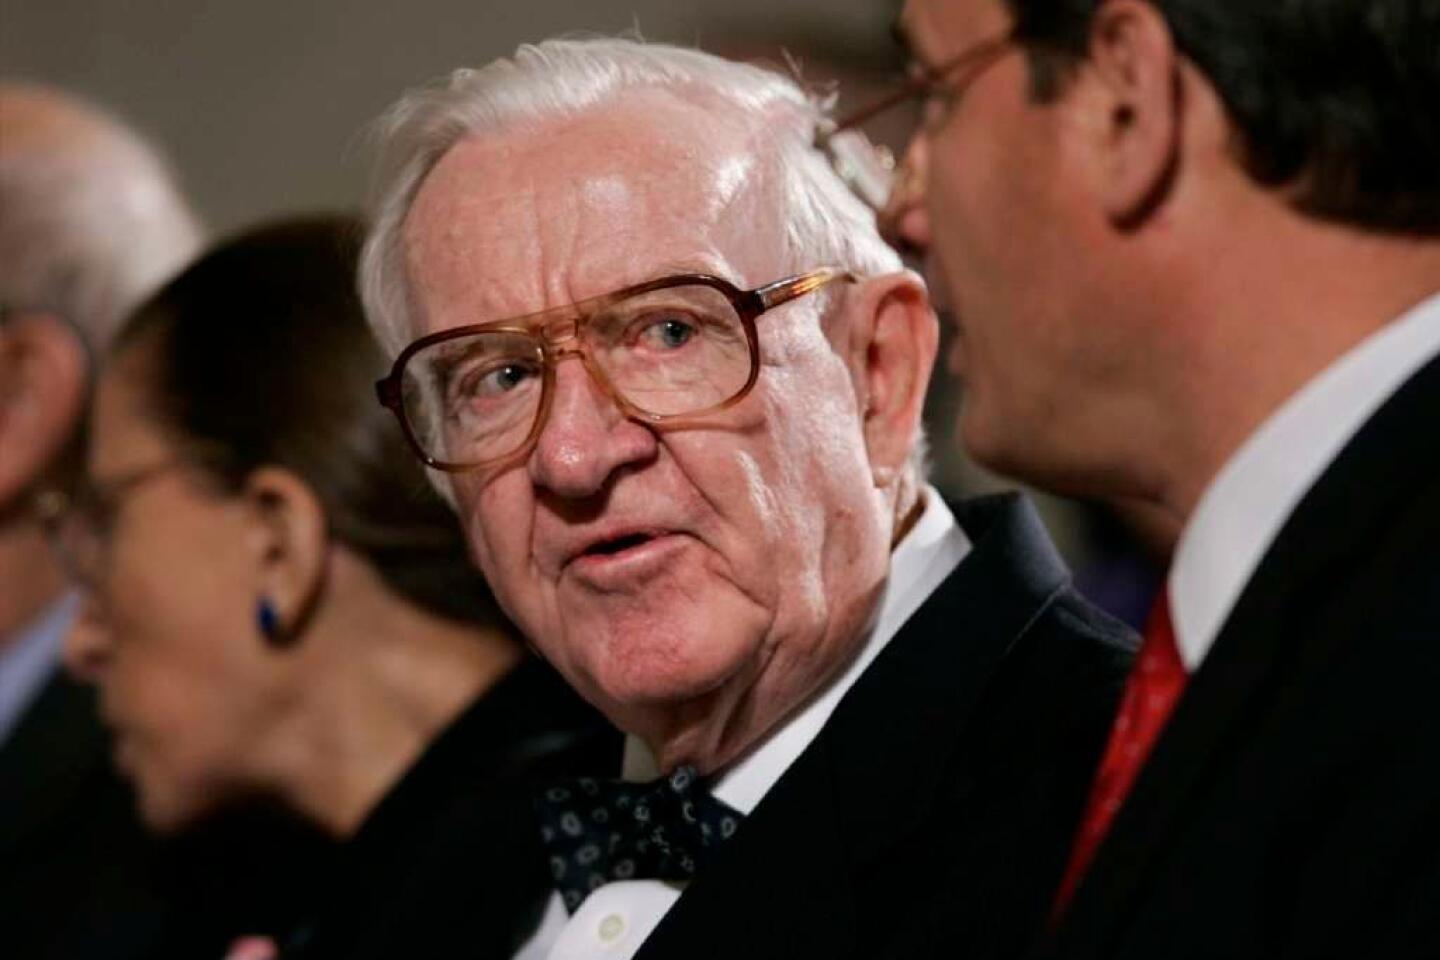 Supreme Court Justice John Paul Stevens, Who Led Liberal Wing, Dies at 99 -  The New York Times